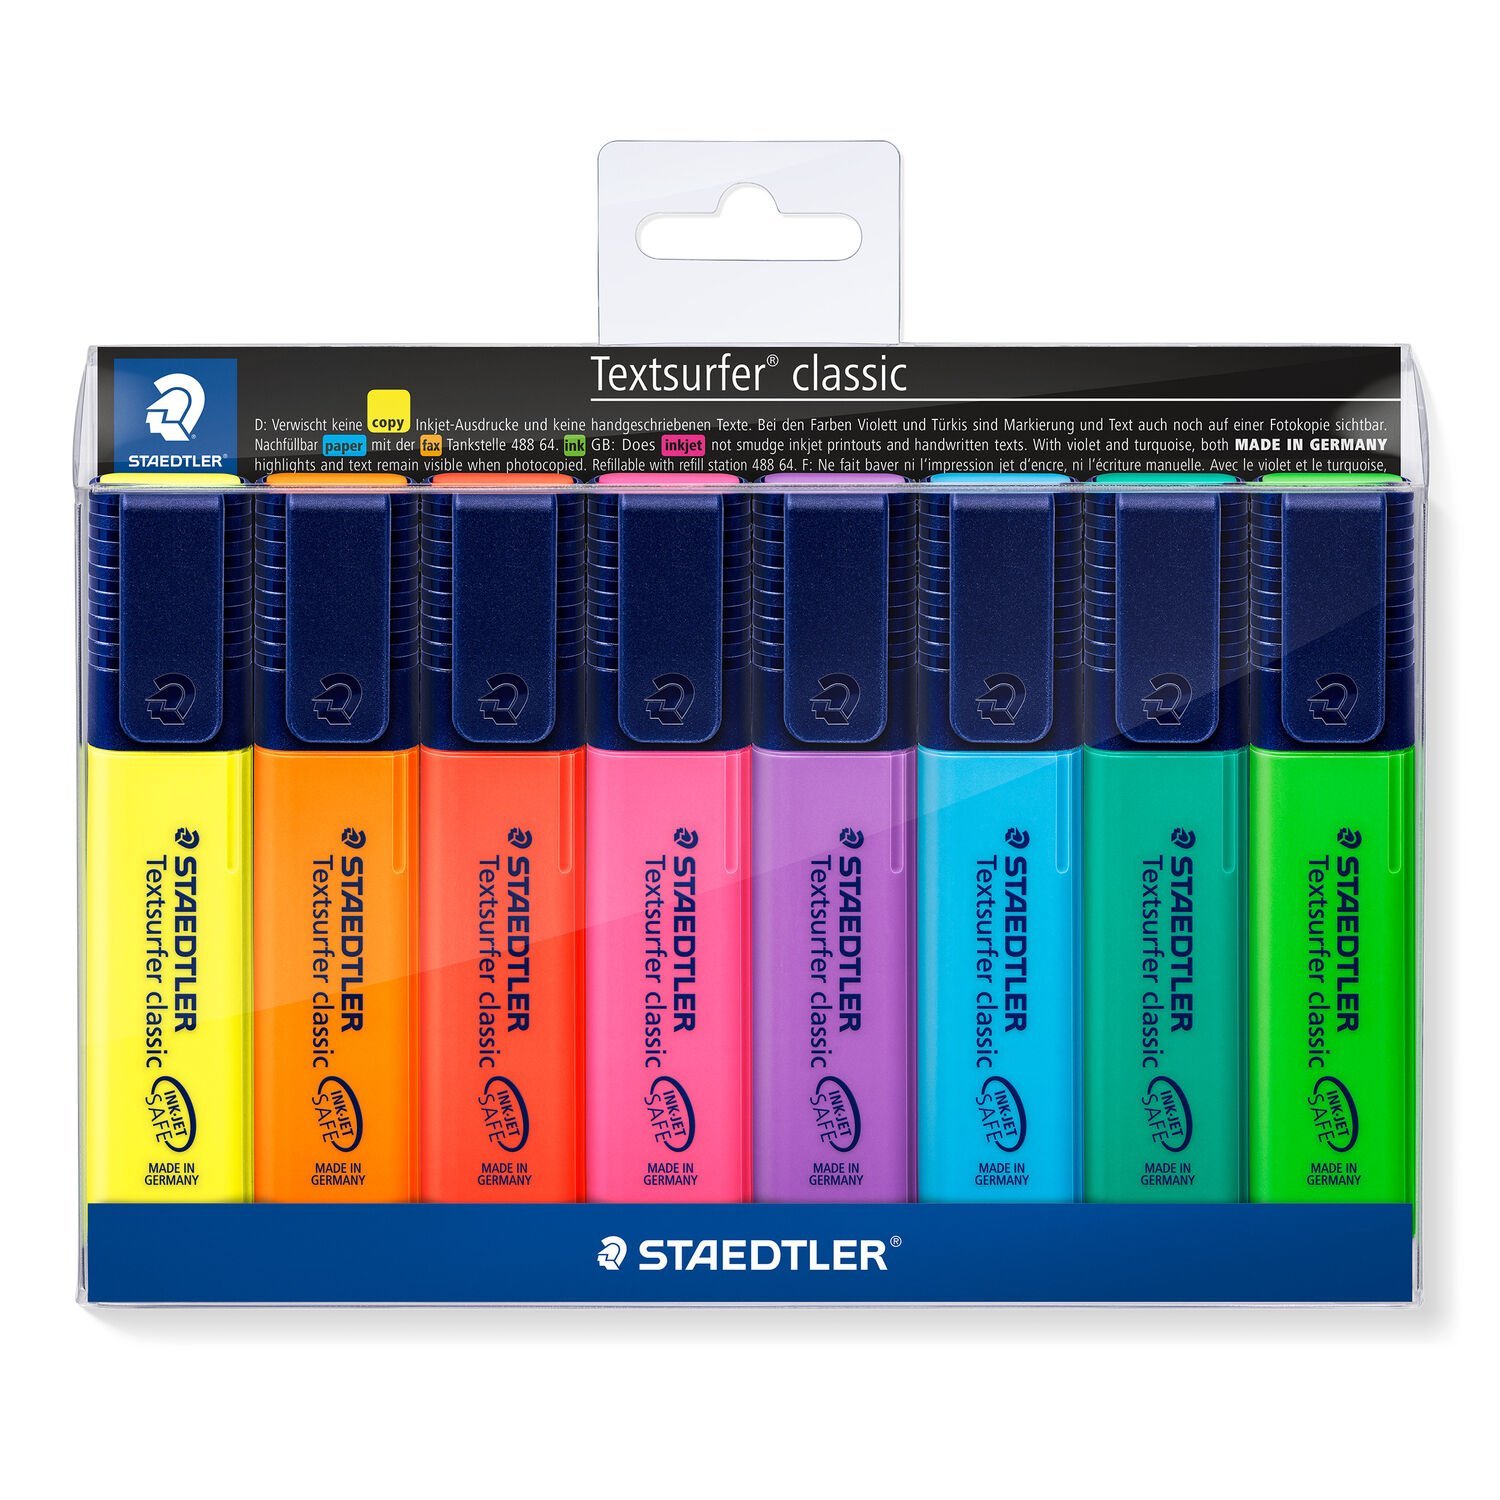 Wallet containing 8 Textsurfer classic in assorted colours